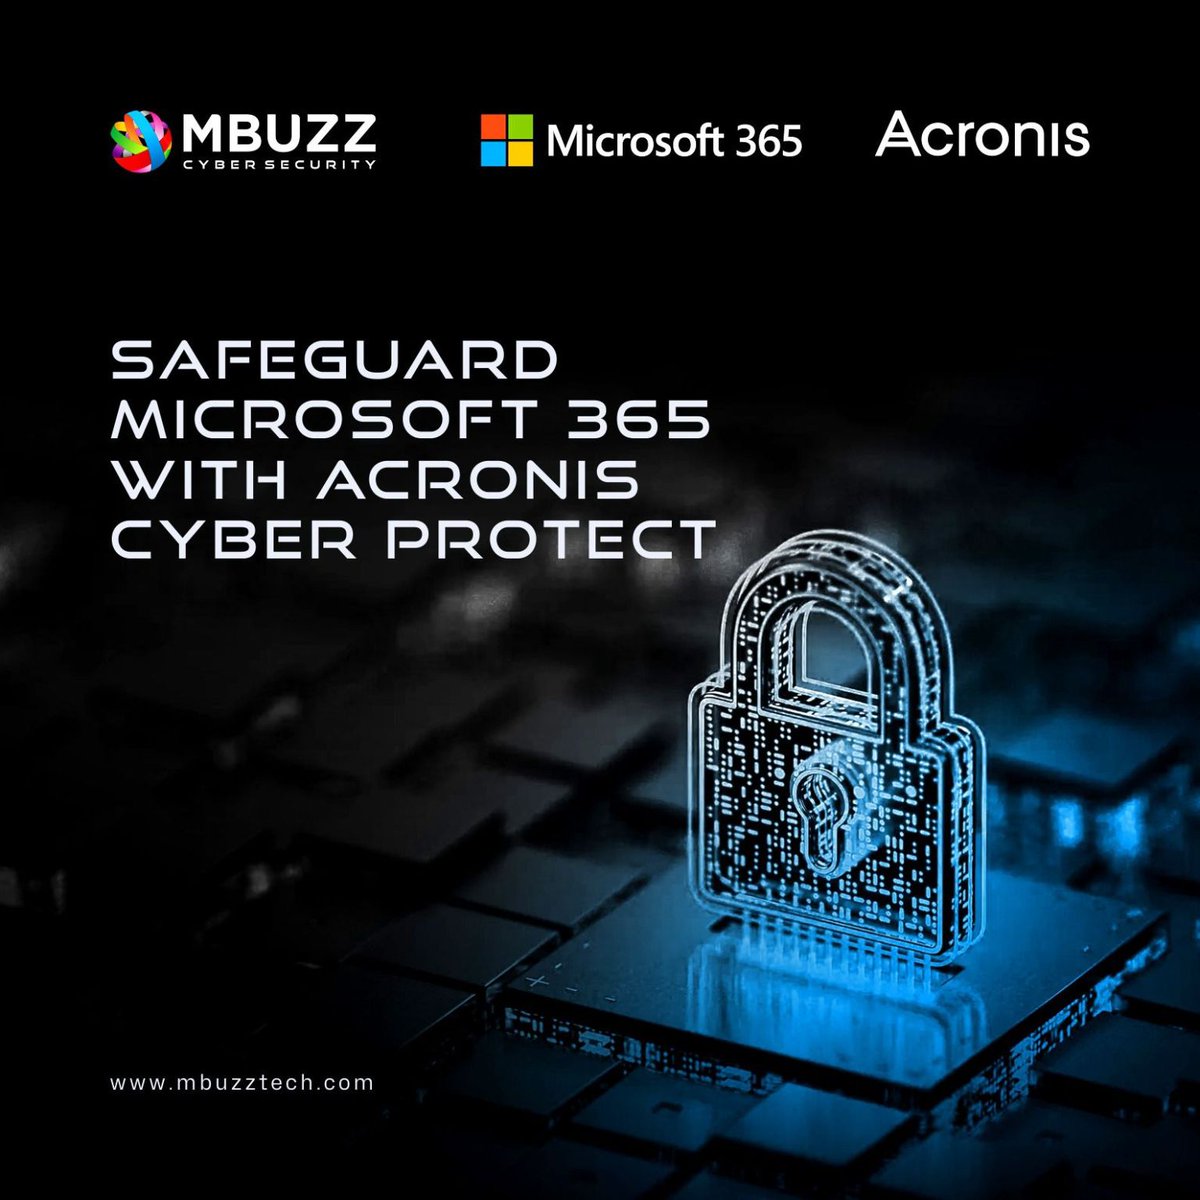 Safeguard Microsoft 365 With Acronis Cyber Protect

Is your company among the 400 million active monthly users of Microsoft 365? 
Don't leave your data vulnerable - take control with Acronis Cyber Protect! 

#DataProtection #Microsoft365